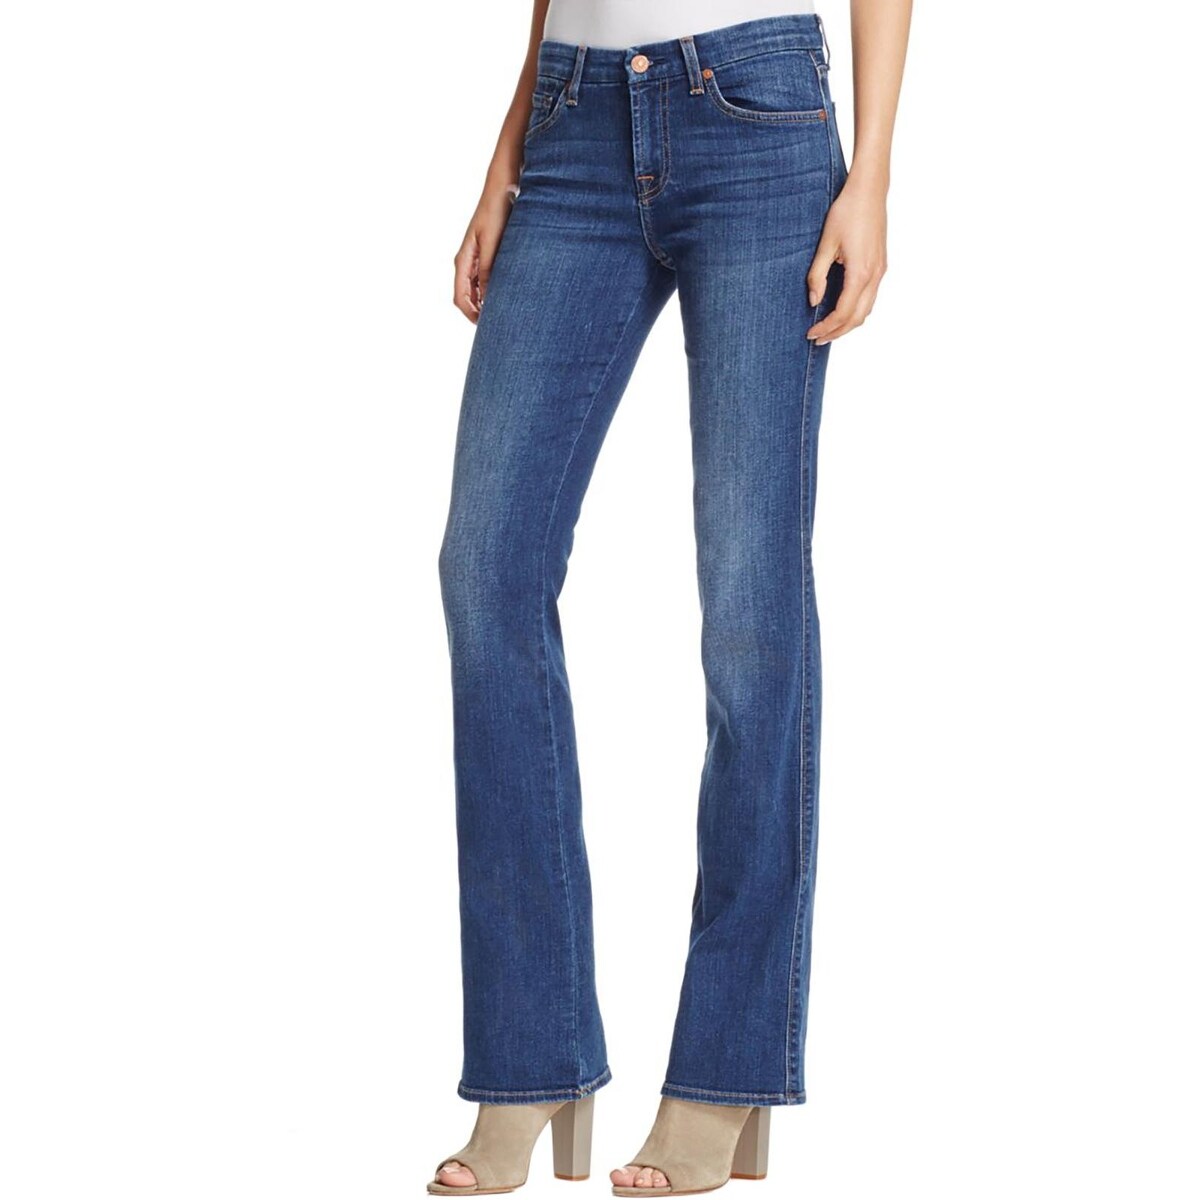 7 jeans bootcut womens